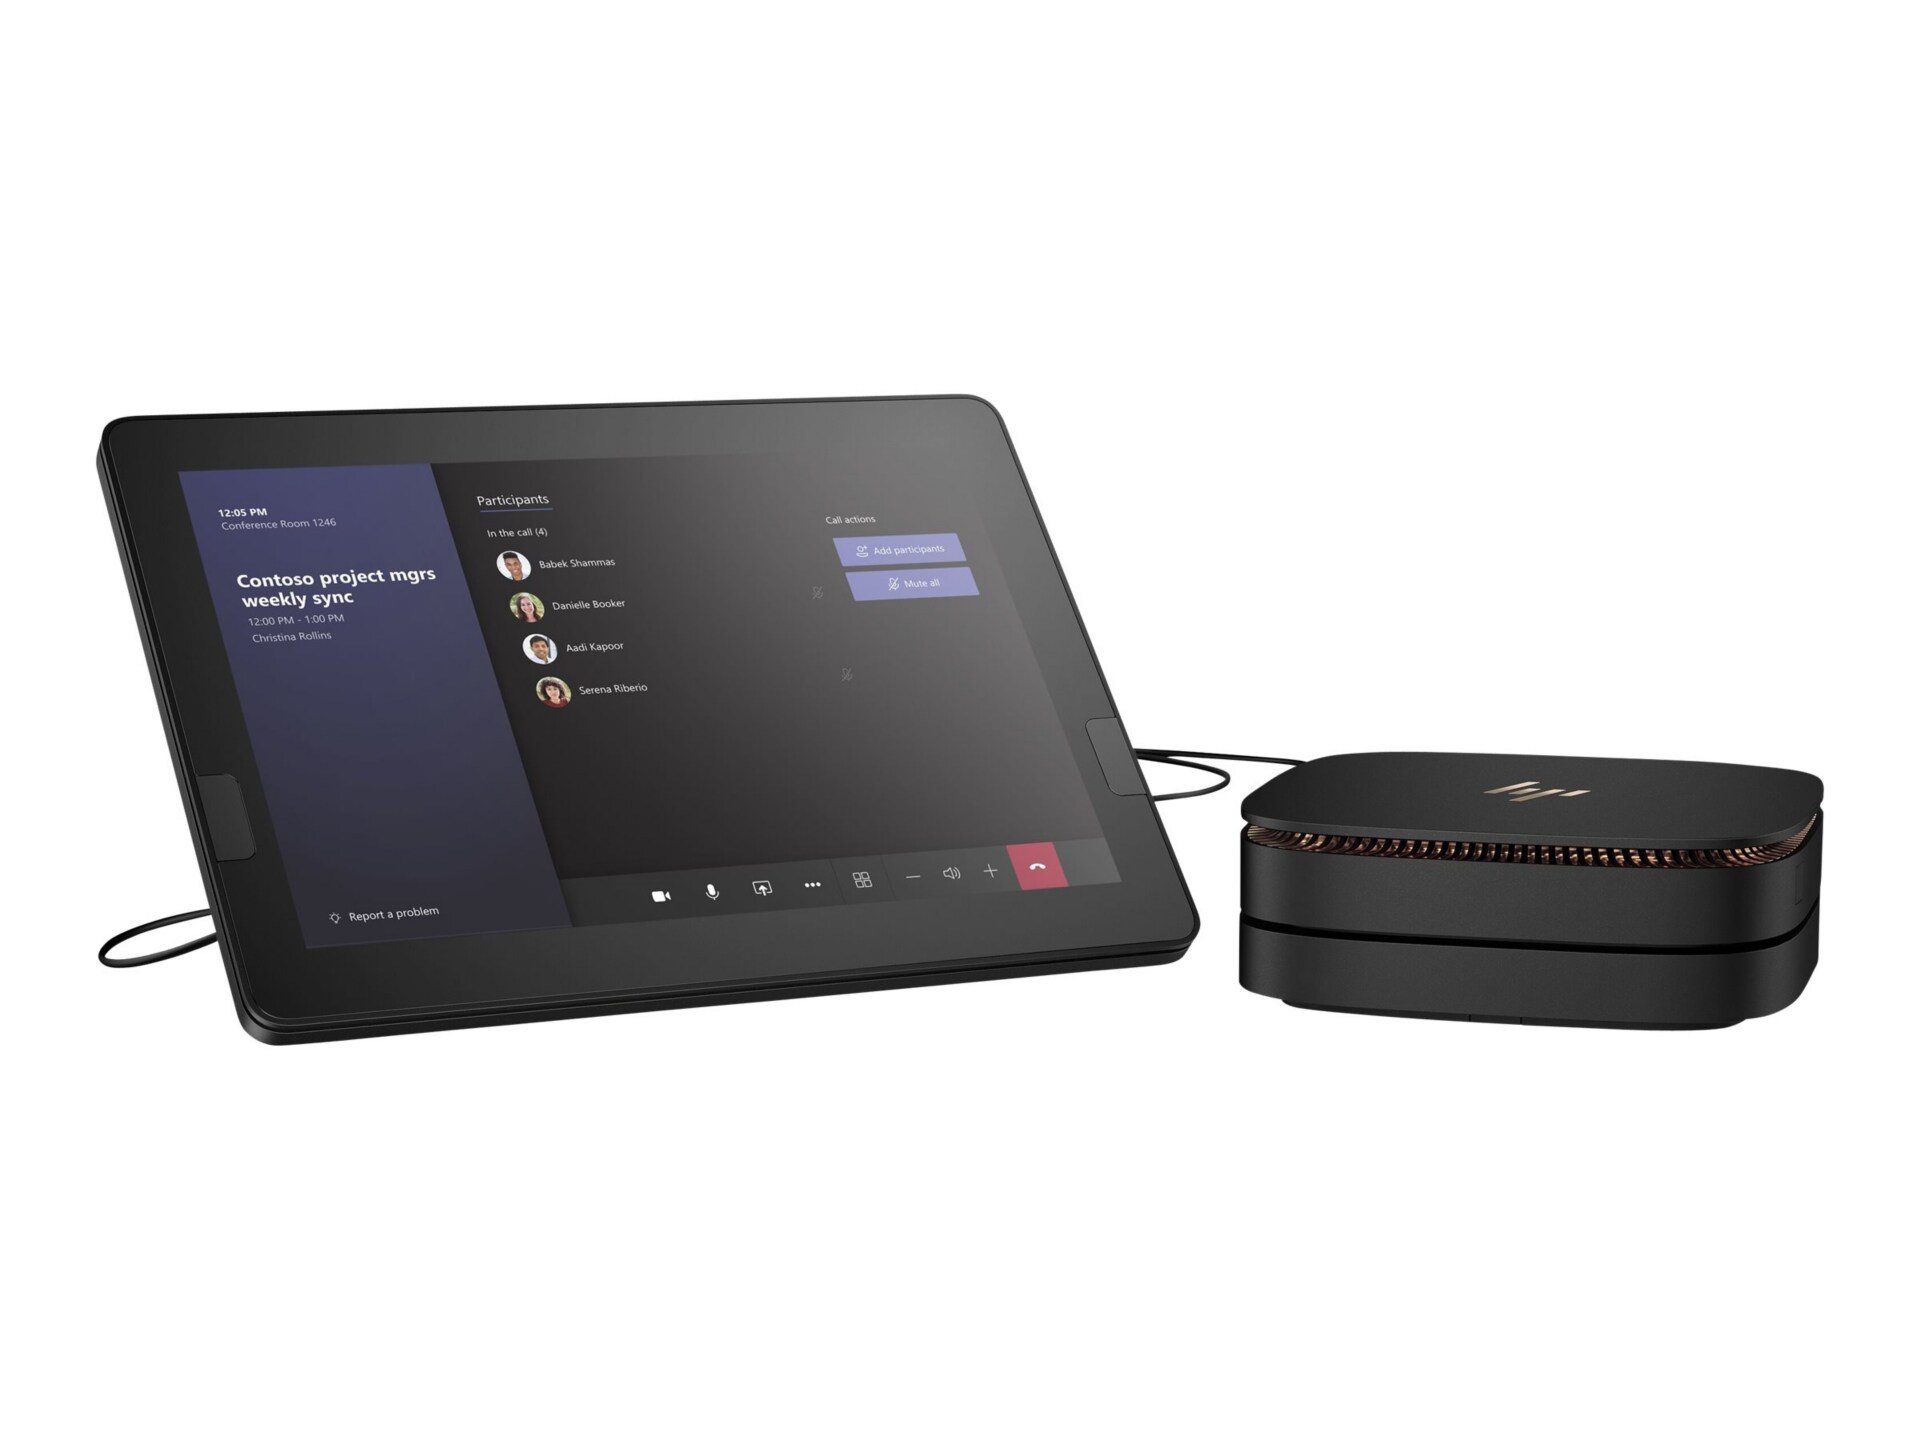 HP Elite Slice G2 Audio Ready with Microsoft Teams Rooms - USFF - Core i5 7500T 2.7 GHz - vPro - 8 GB - SSD 128 GB - LCD